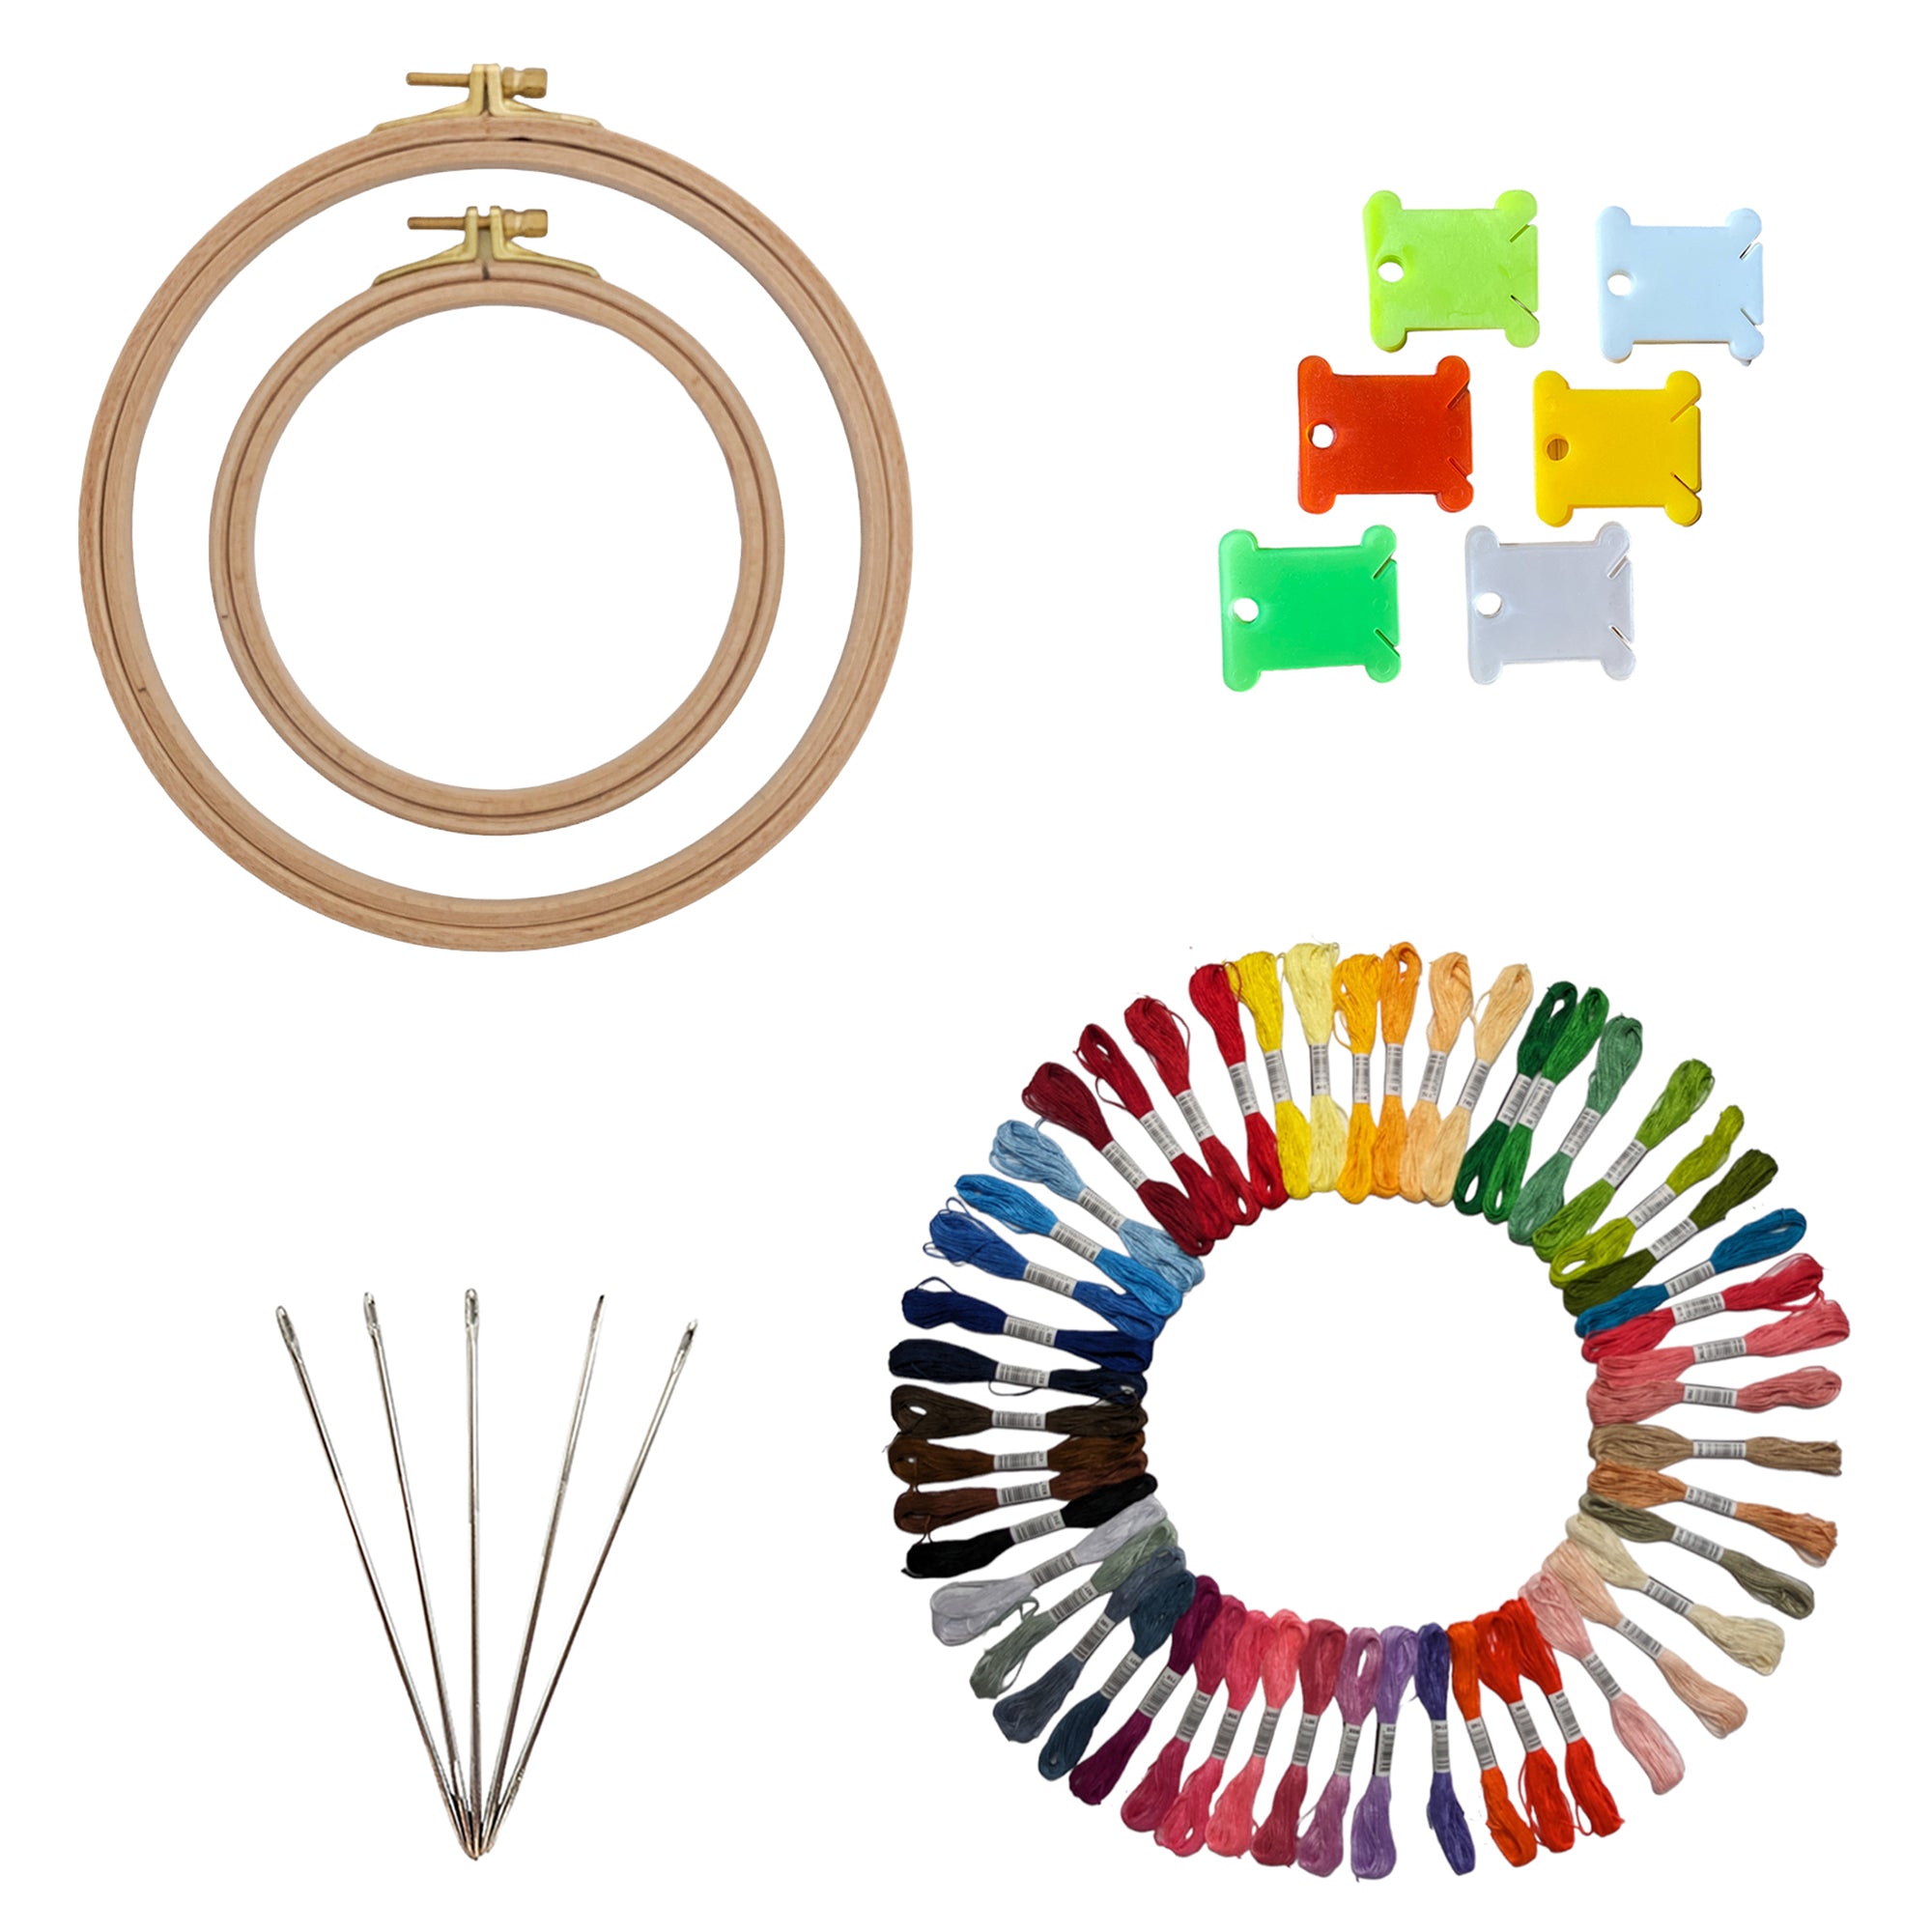 Embroidery Kit with 2 Beech Wood Hoops, 100% Cotton Embroidery